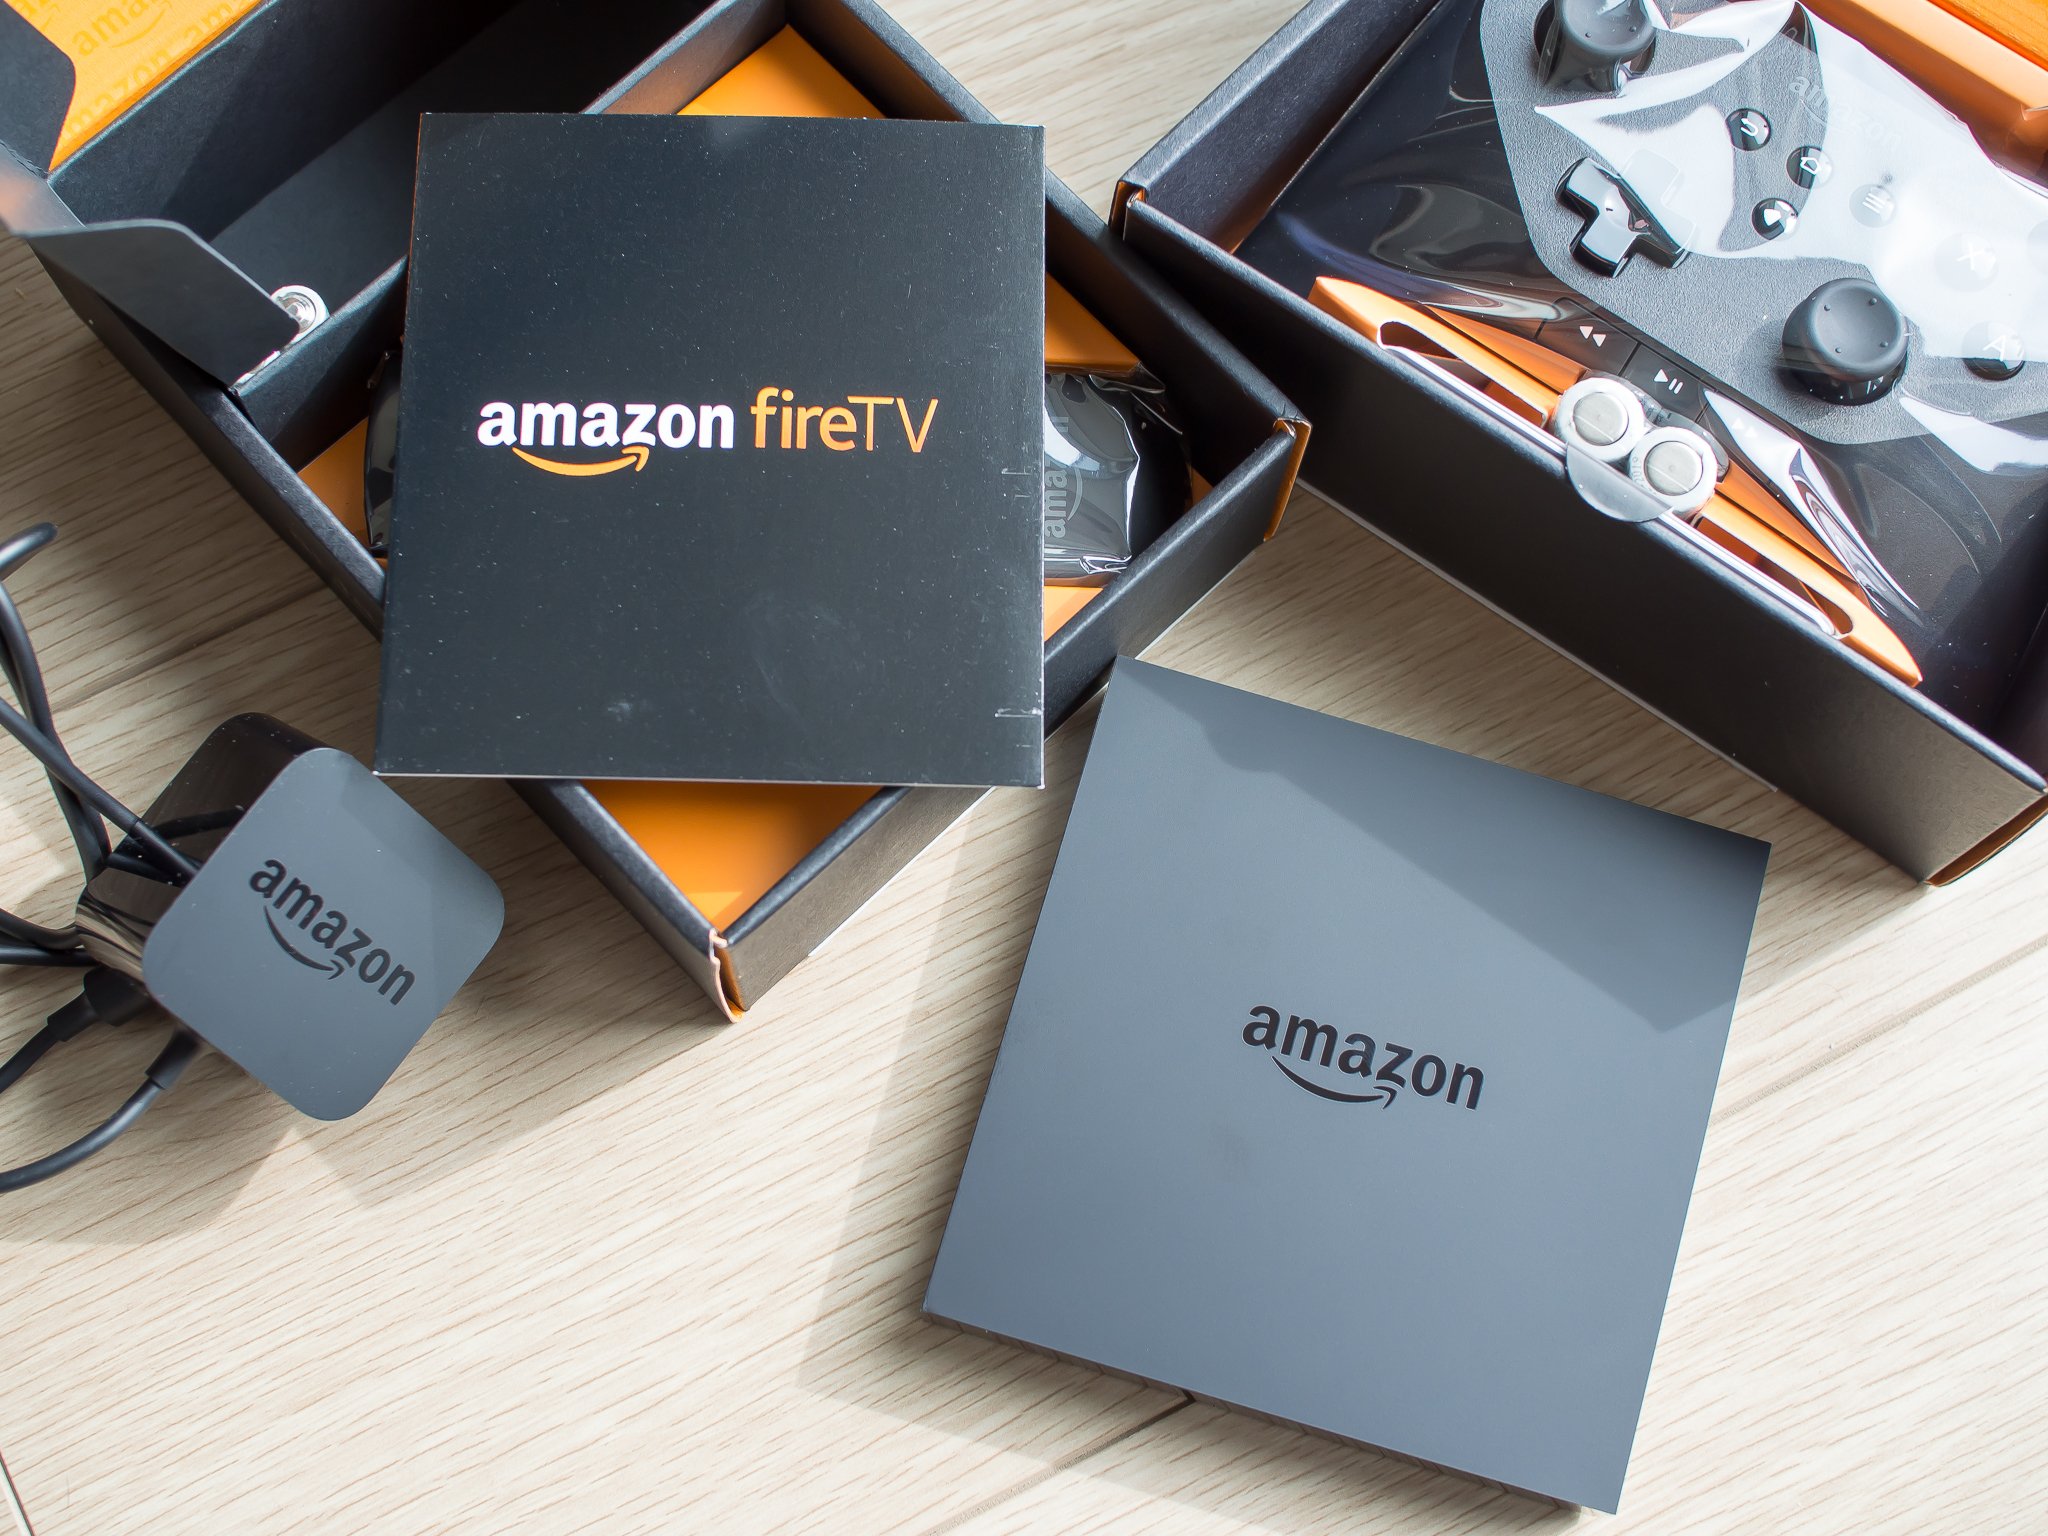 iFixit teardown finds Amazon's Fire TV to be very hot indeed